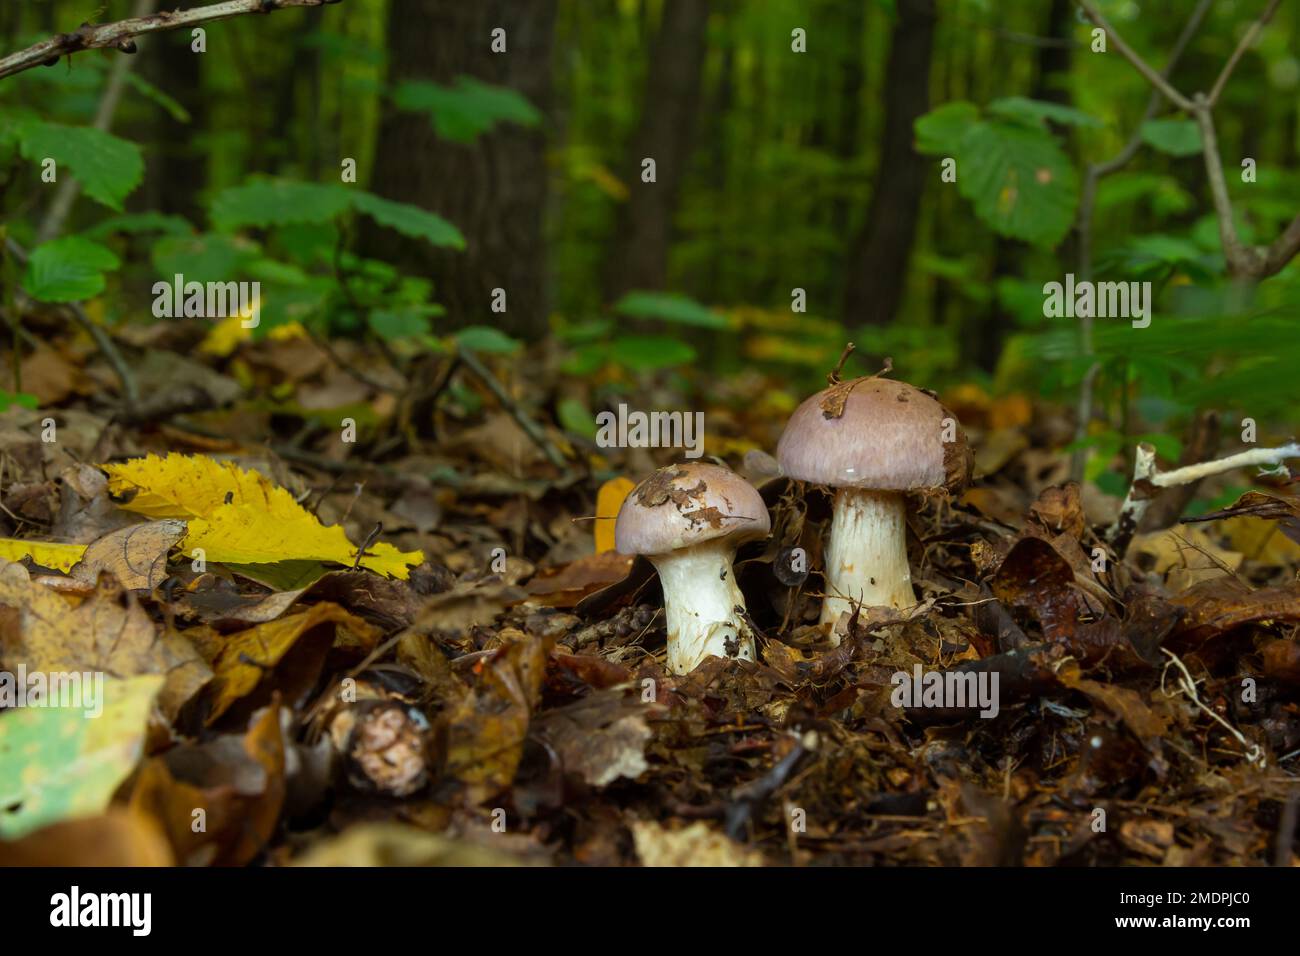 Small Gassy webcap, Cortinarius traganus, poisonous mushrooms in forest close-up, selective focus, shallow DOF. Stock Photo